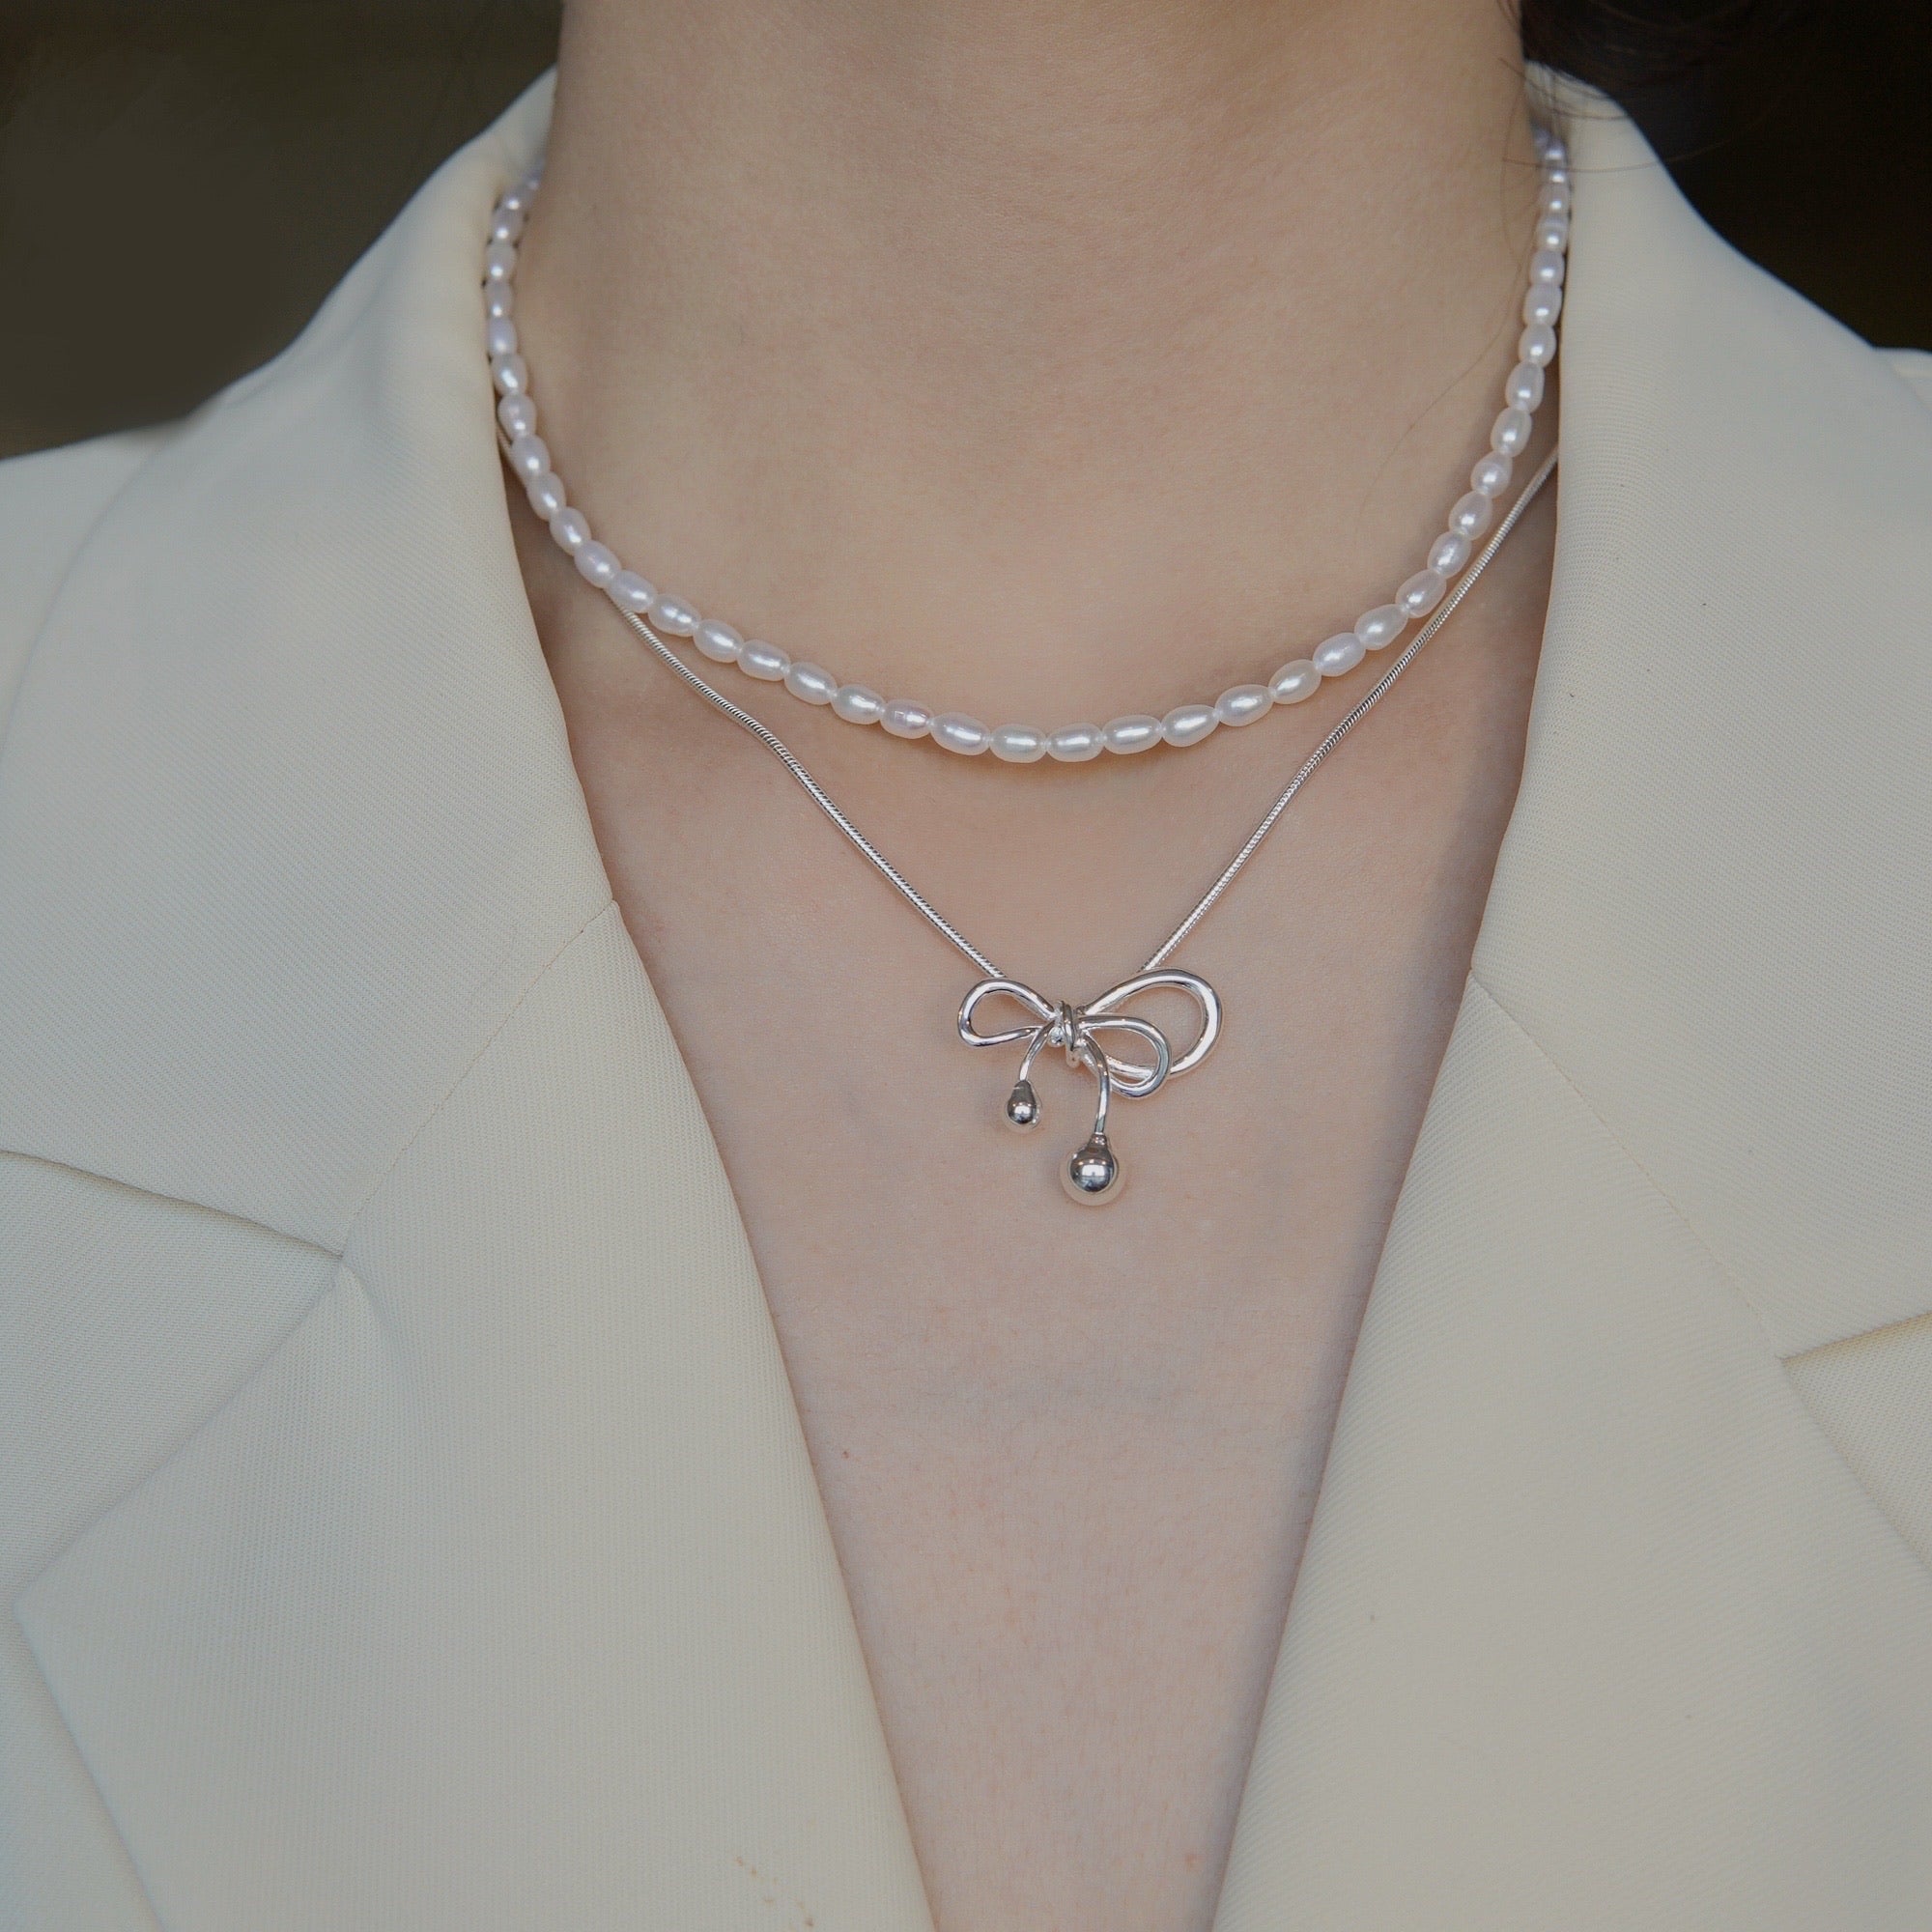 Bowknot Silver Necklace